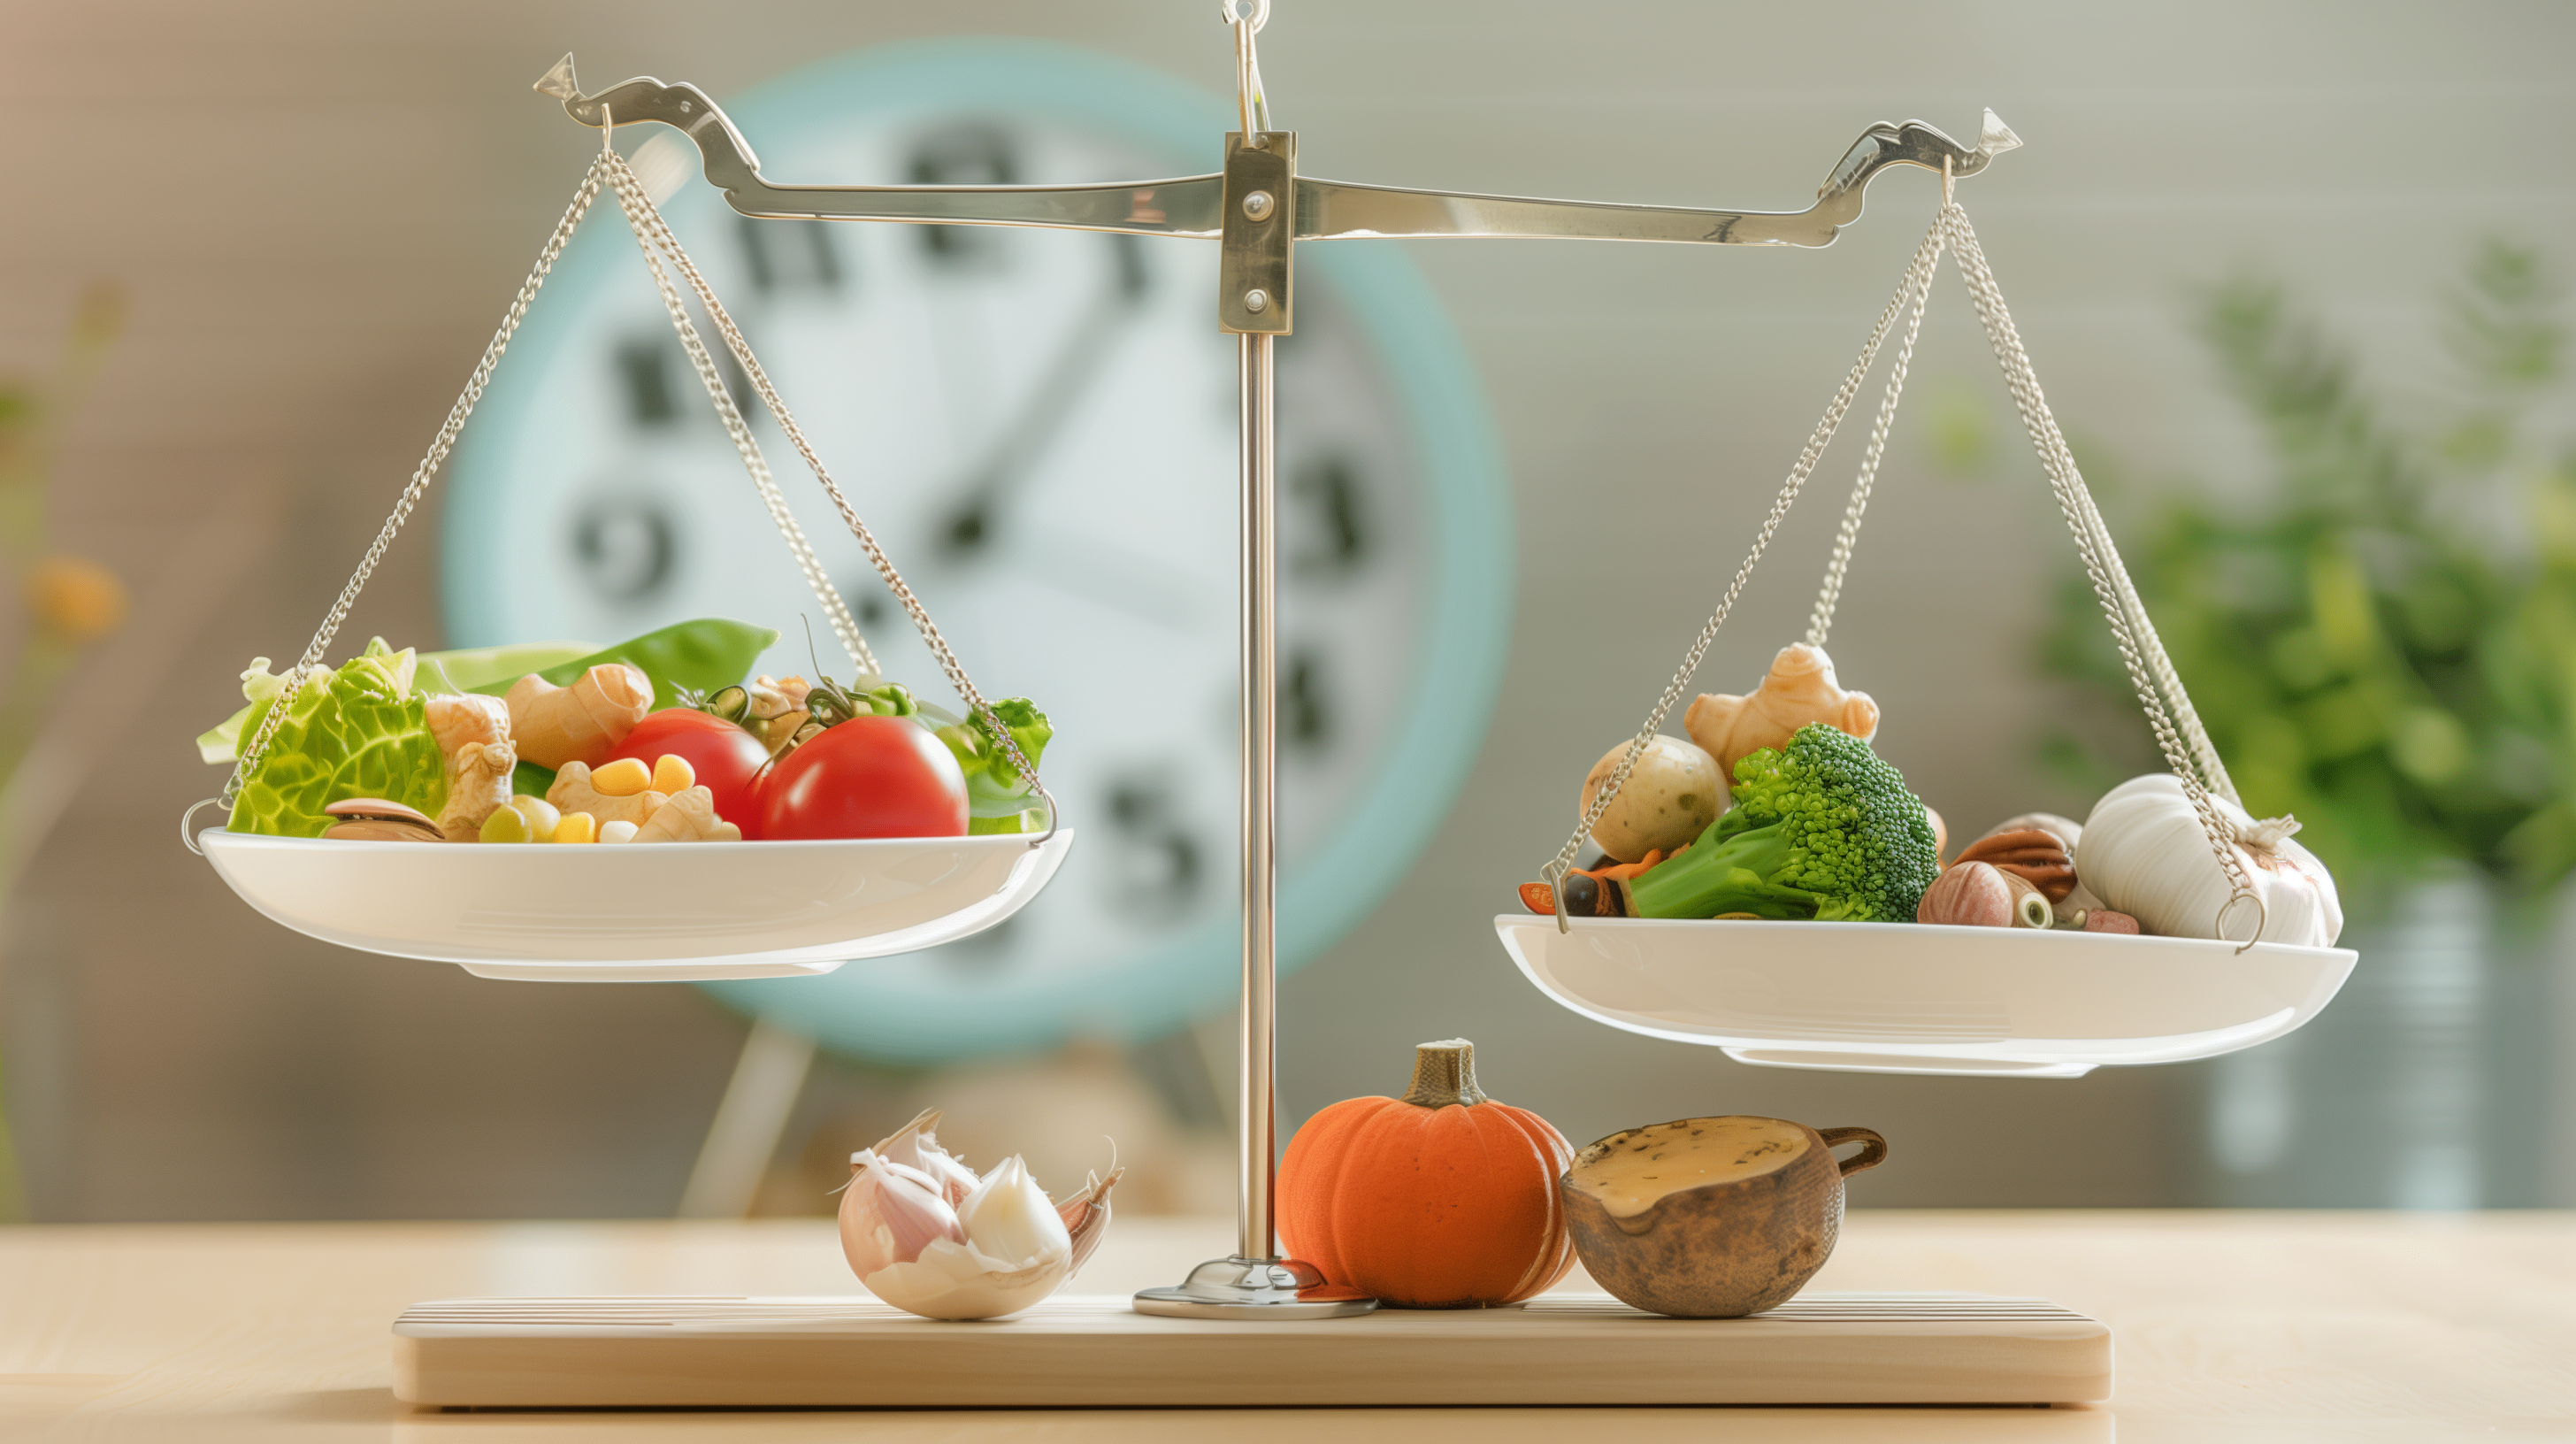 balanced scale with foods rich in probiotics on one side and an empty plate on the other, subtly incorporating a clock displaying meal times